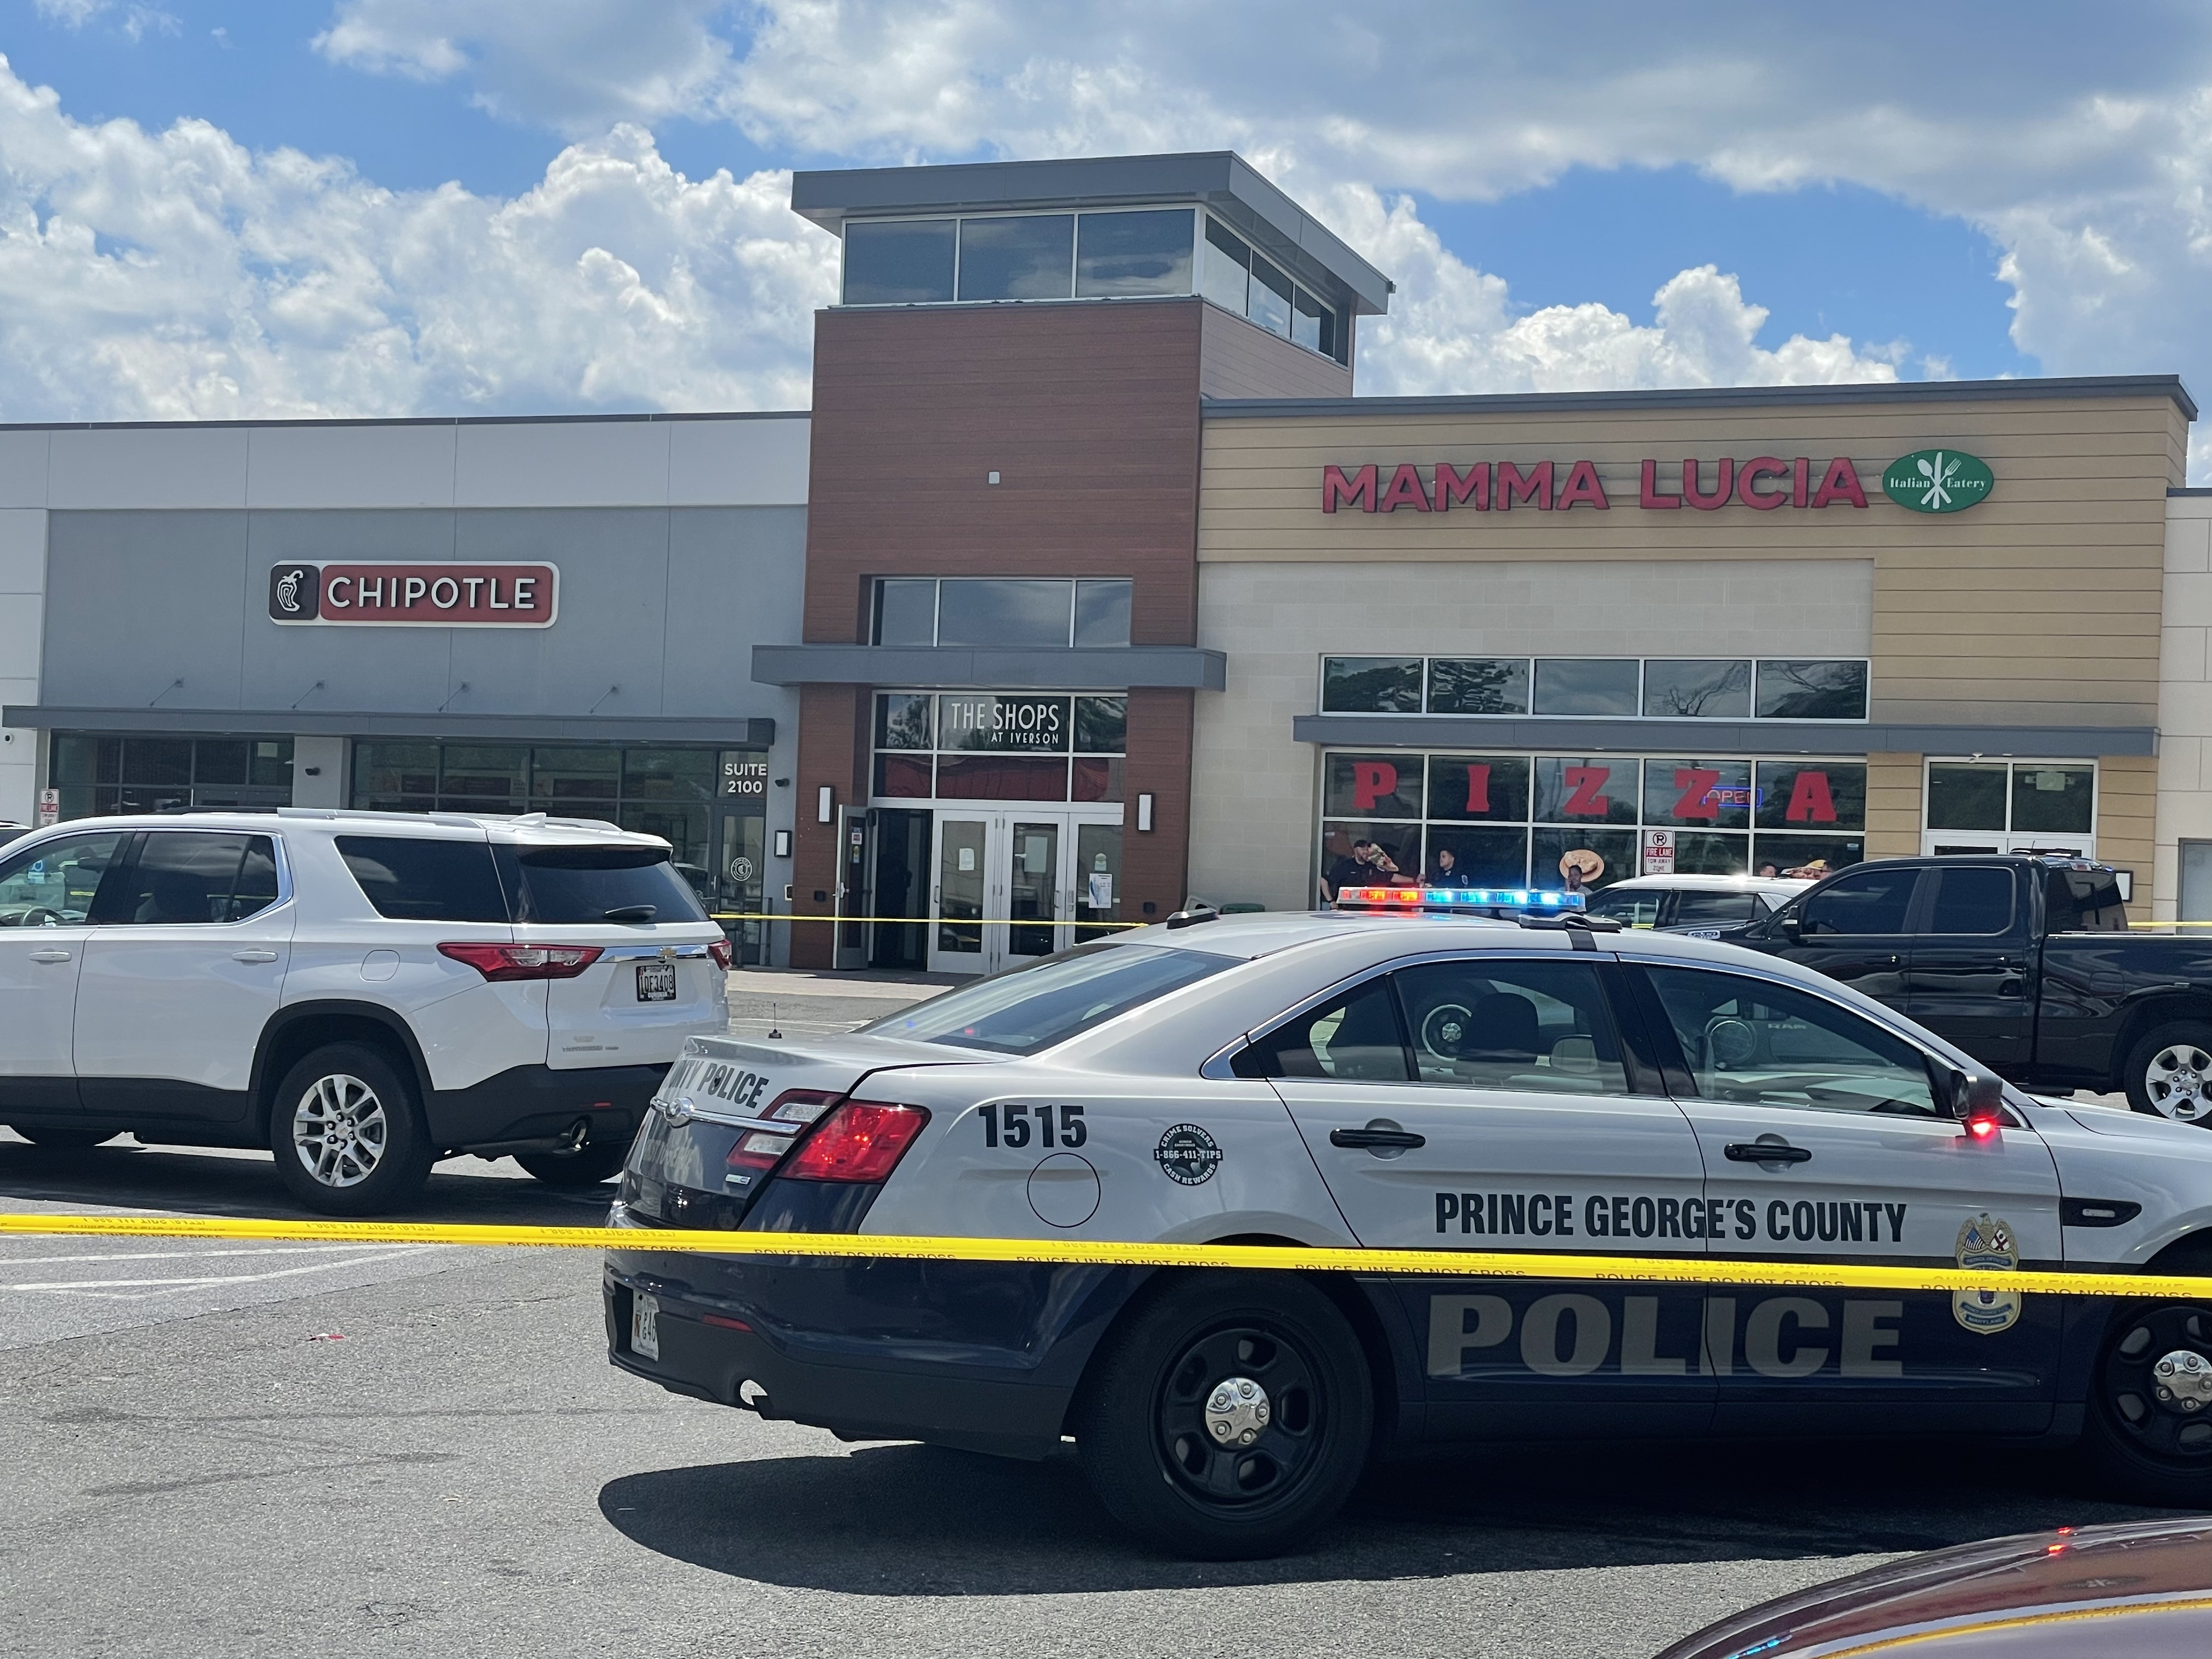 Shooting at Iverson Mall in Maryland leaves at least three injured in  terrifying attack